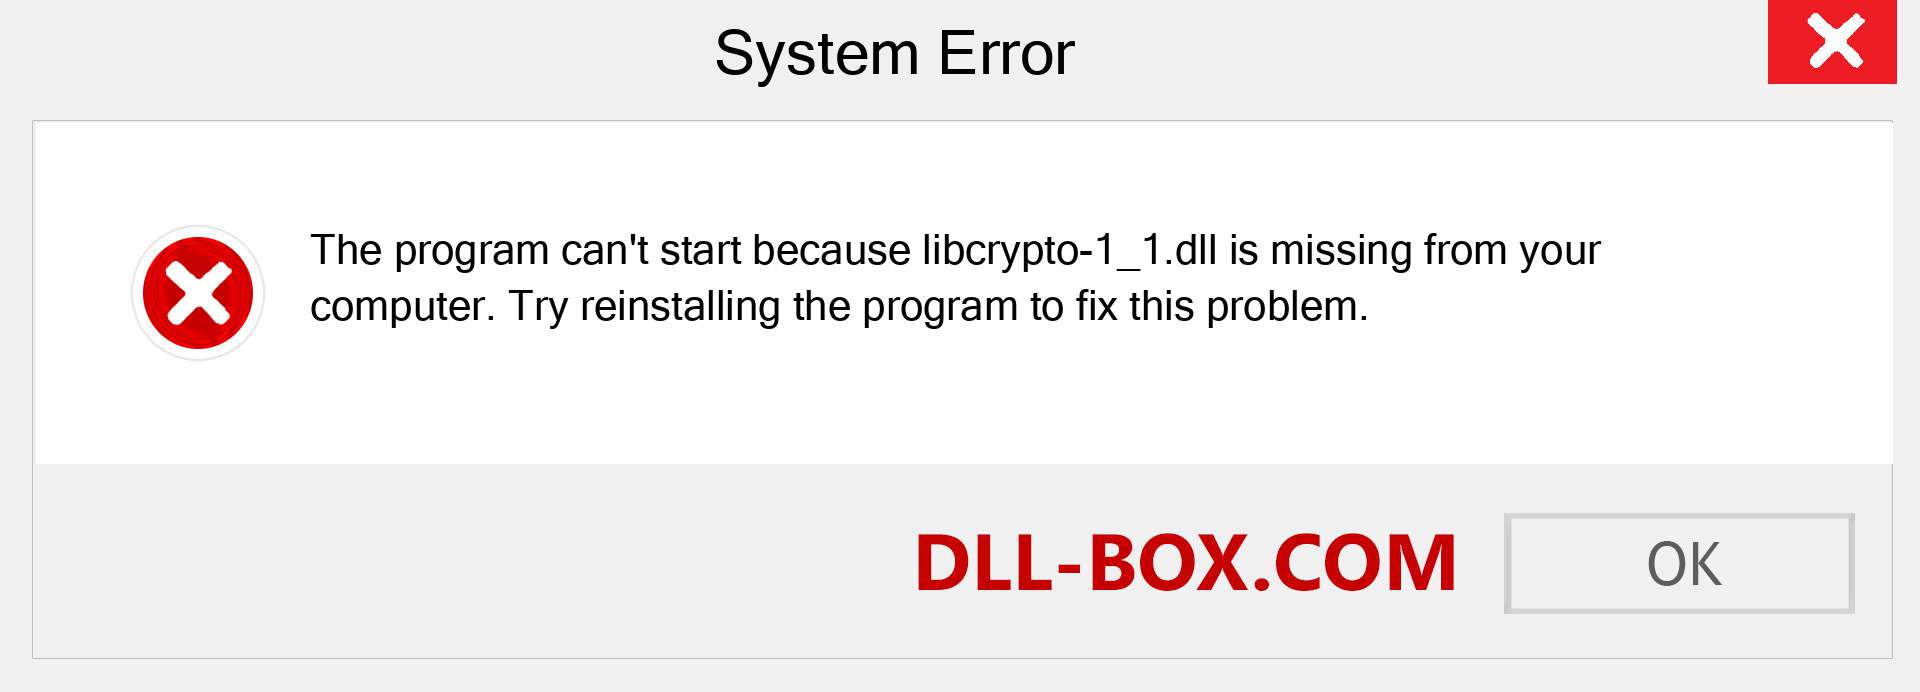  libcrypto-1_1.dll file is missing?. Download for Windows 7, 8, 10 - Fix  libcrypto-1_1 dll Missing Error on Windows, photos, images